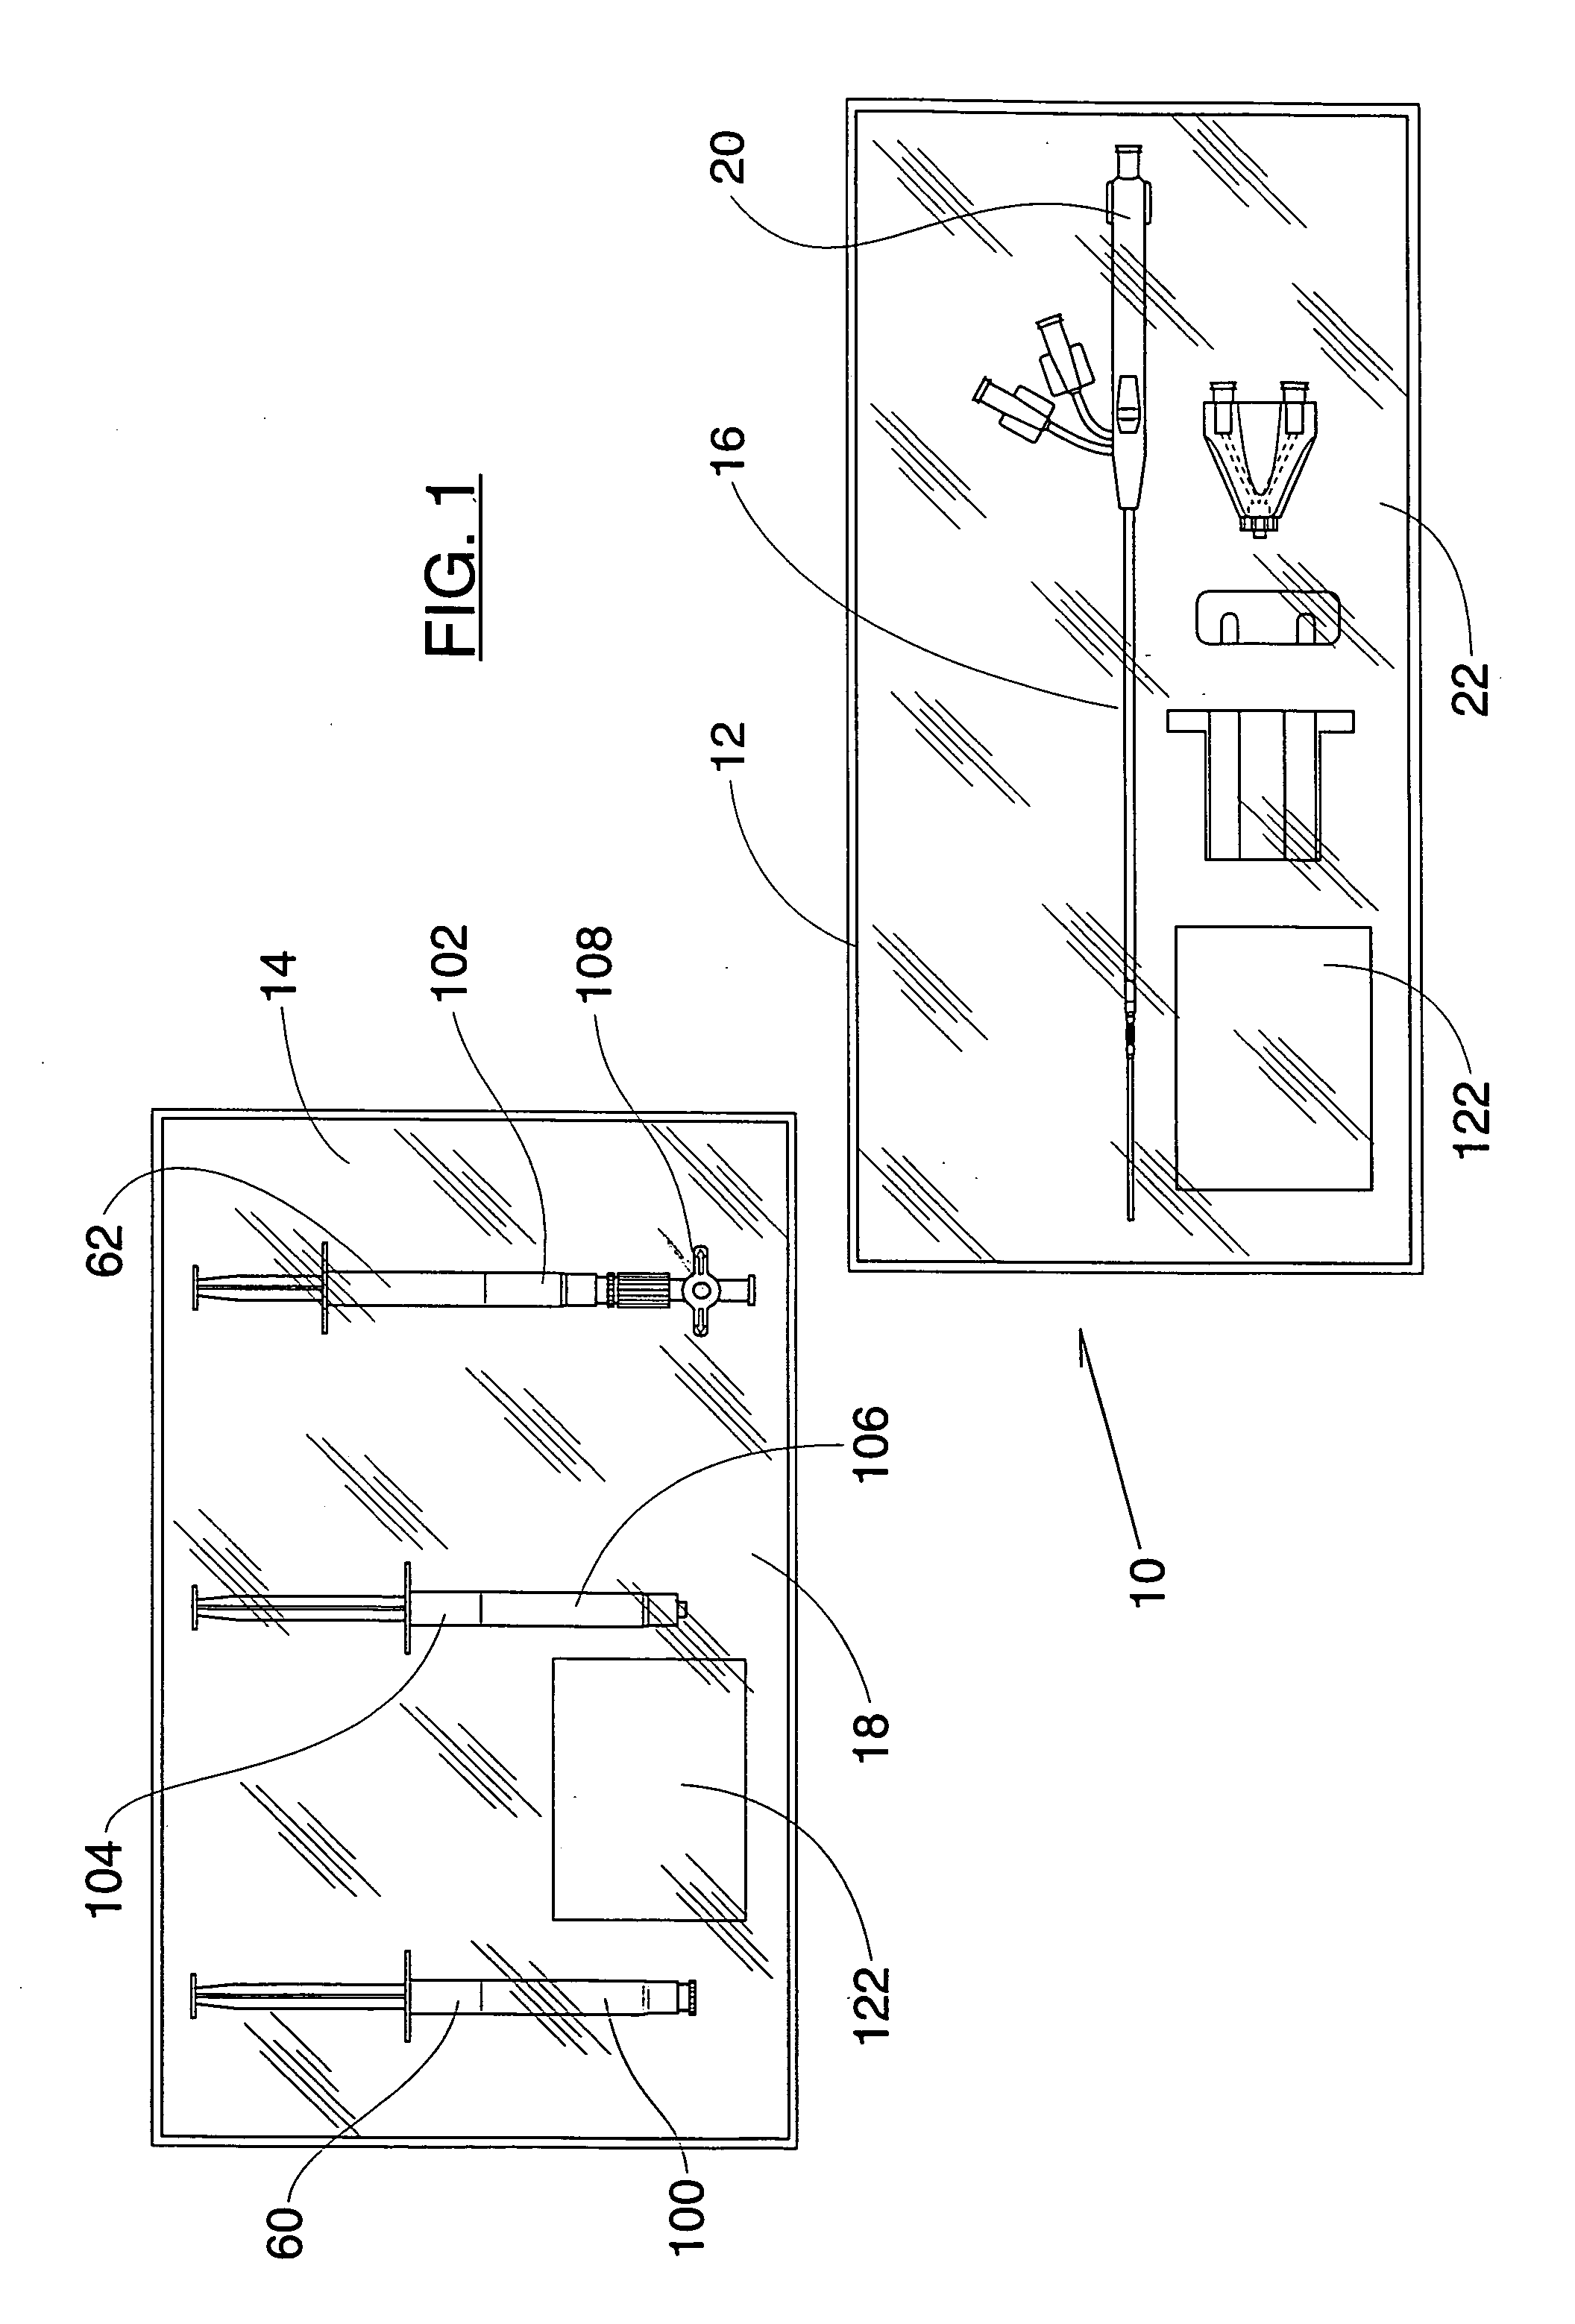 Systems for applying cross-linked mechanical barriers